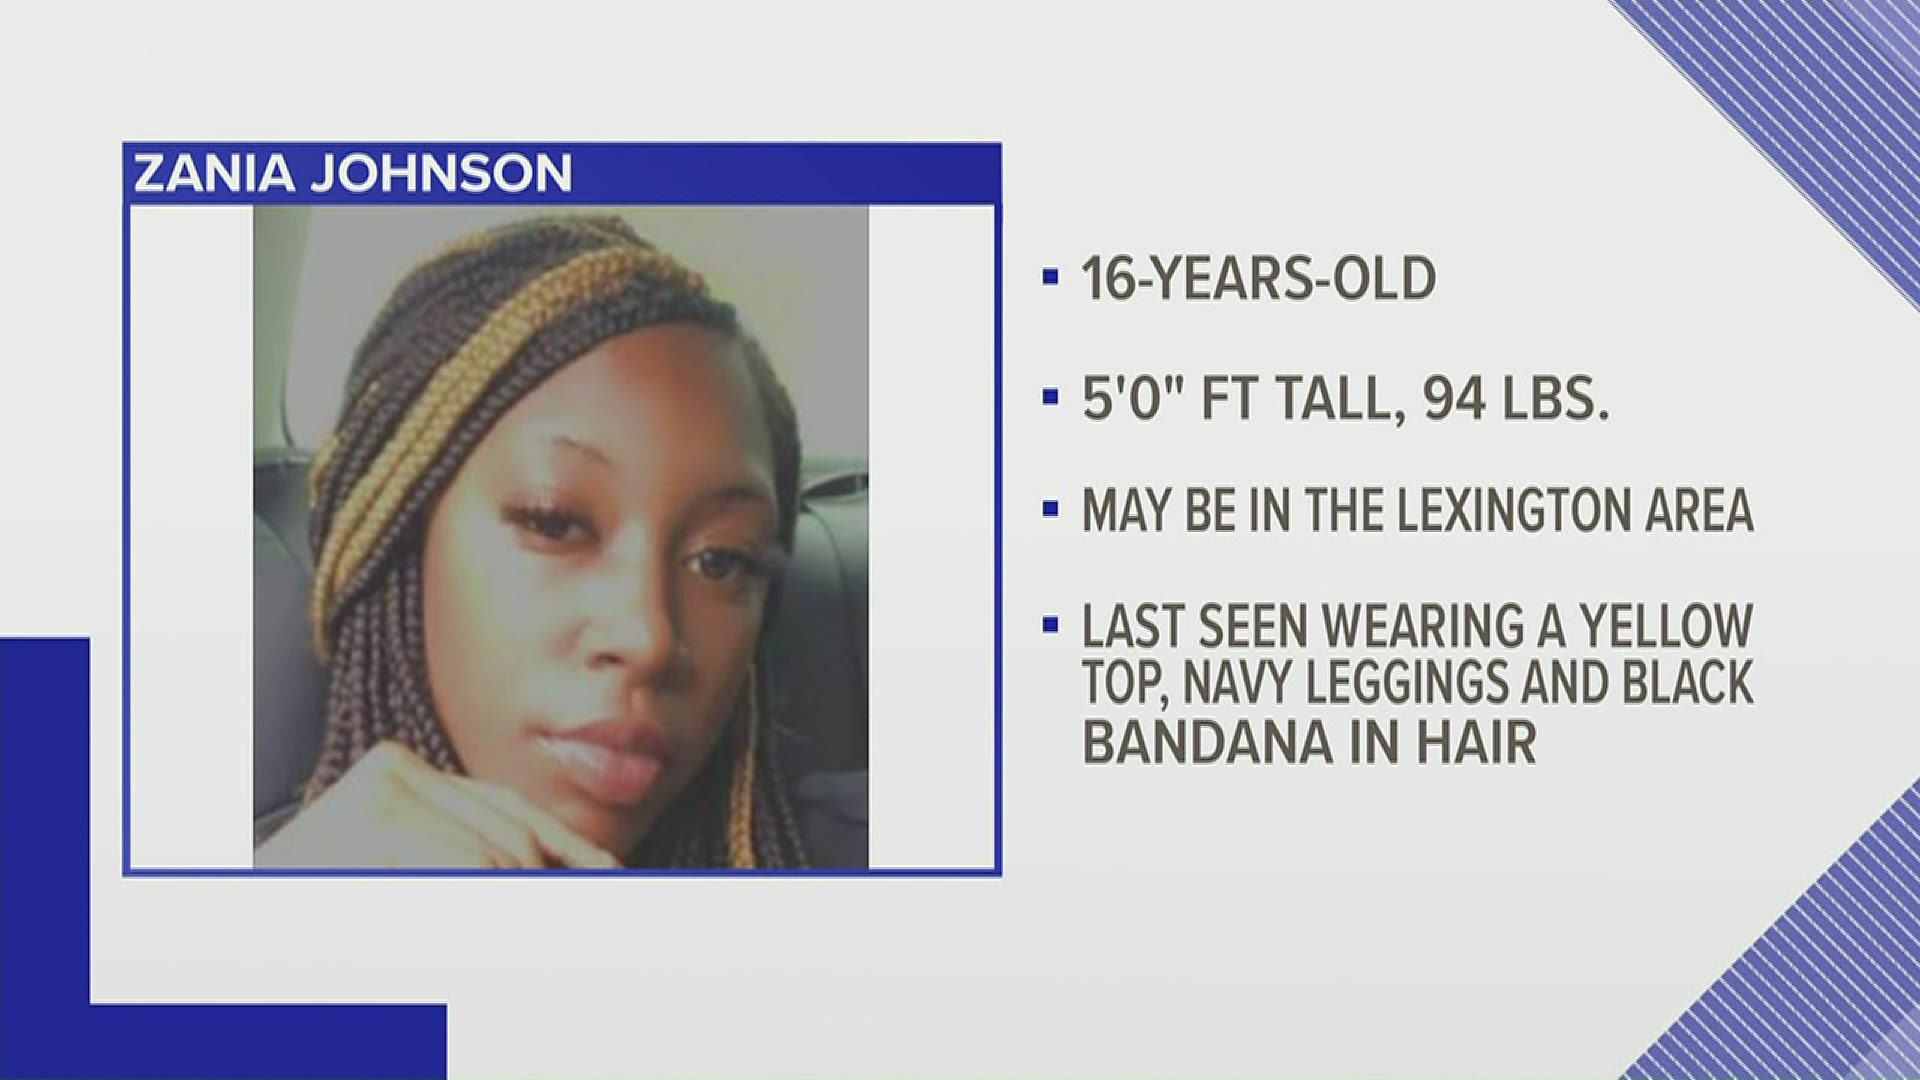 Detectives say they believe 16-year-old Zania Johnson may be in the Lexington area.